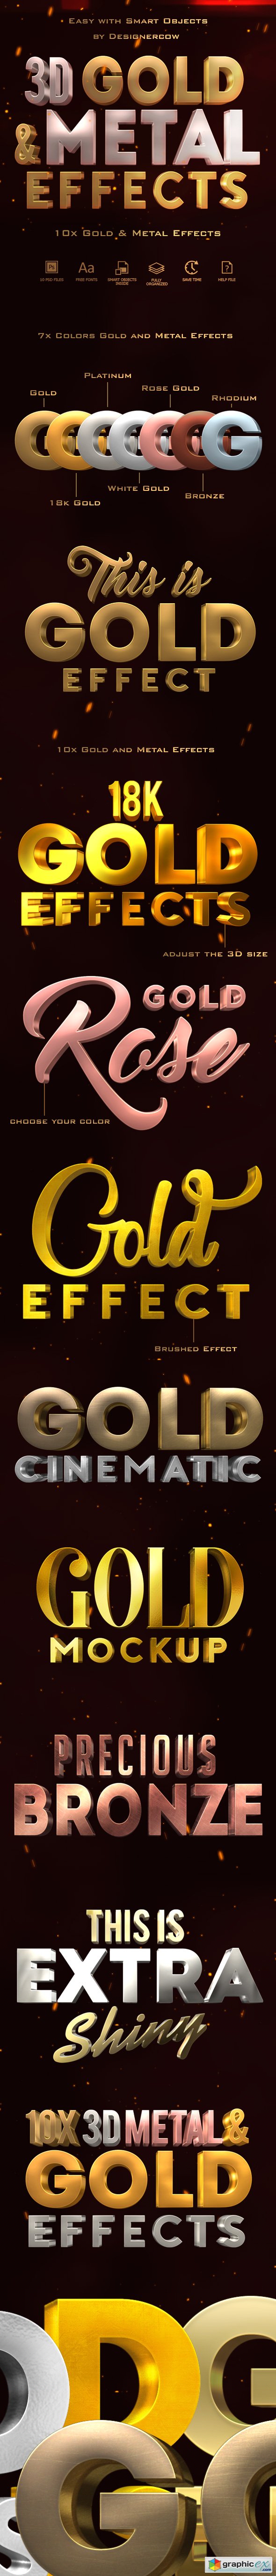 3D Gold and Metal Effects